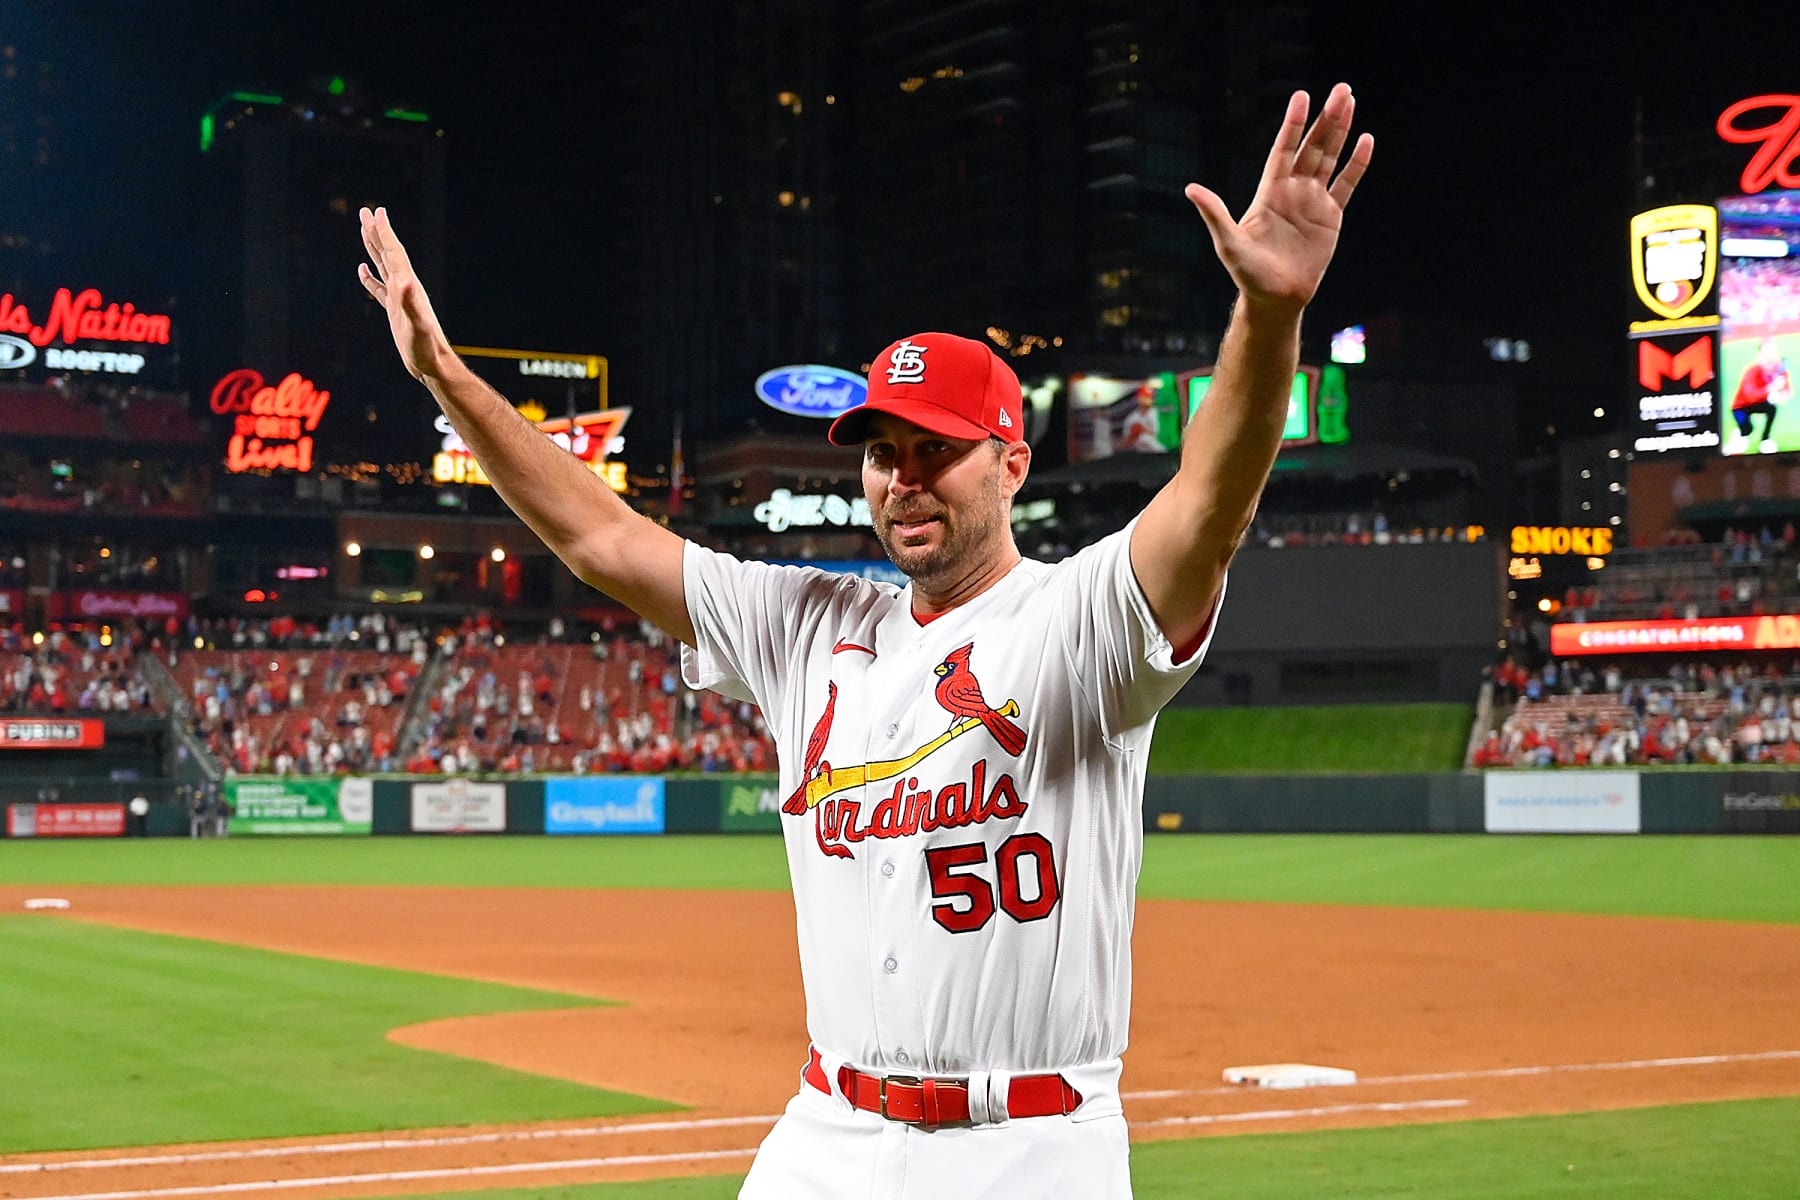 St. Louis Cardinals on X: The legend continues! Congratulations